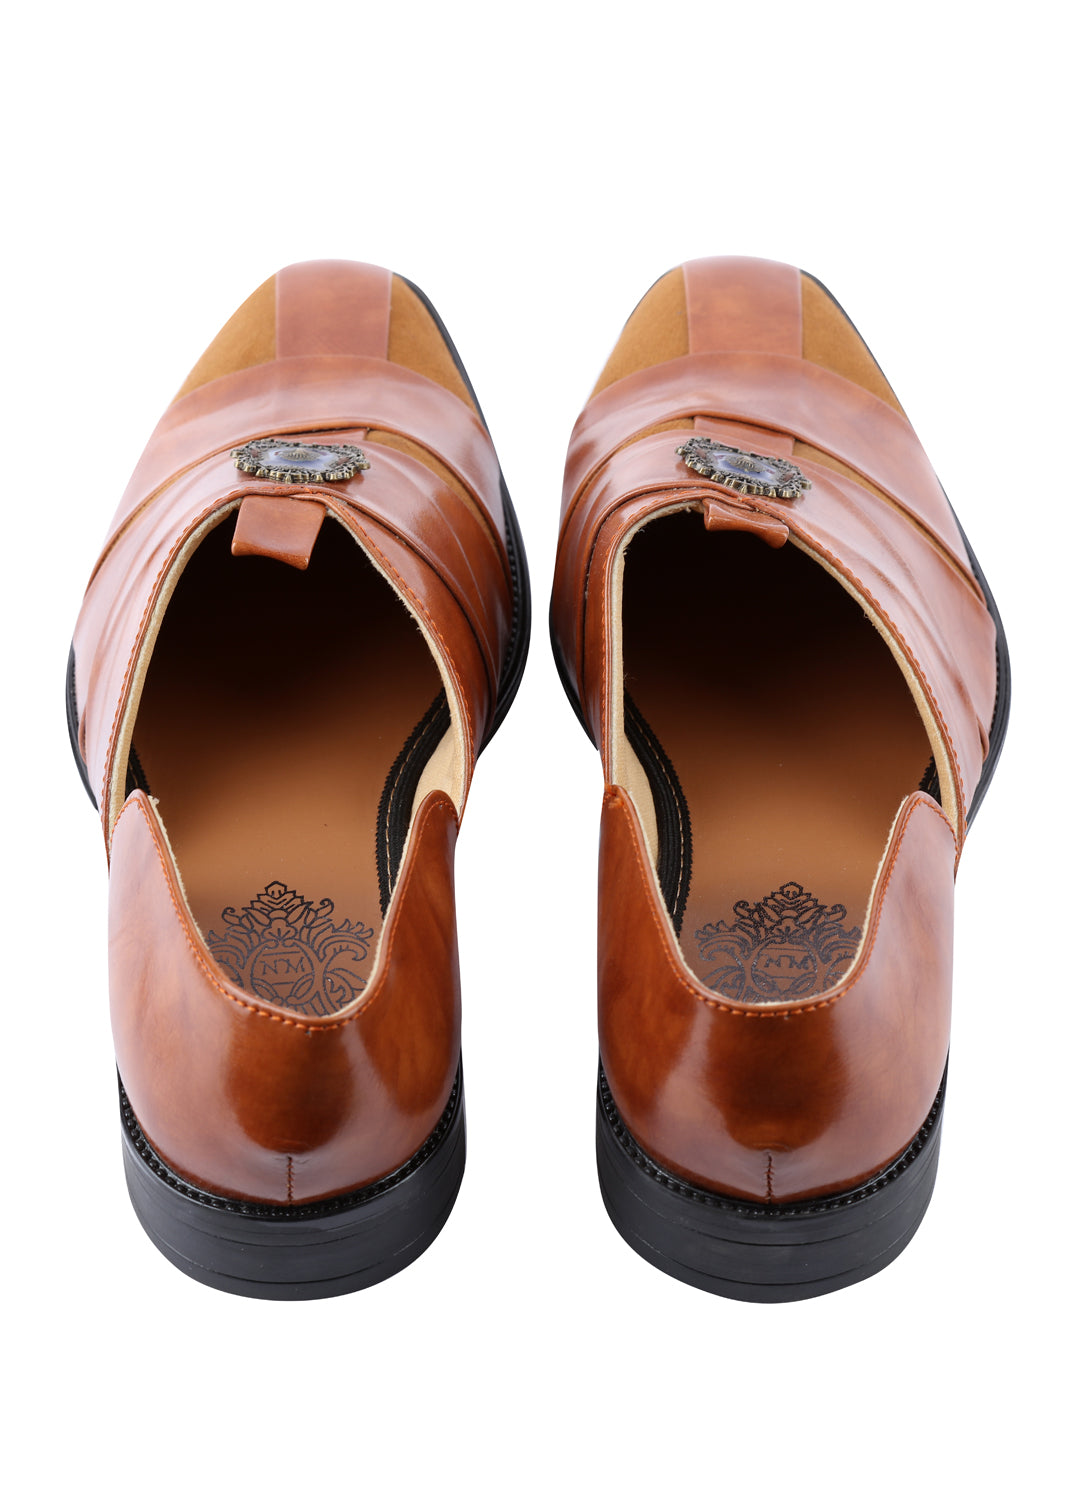 Tan Hand Crafted Semi-Leather Sandals